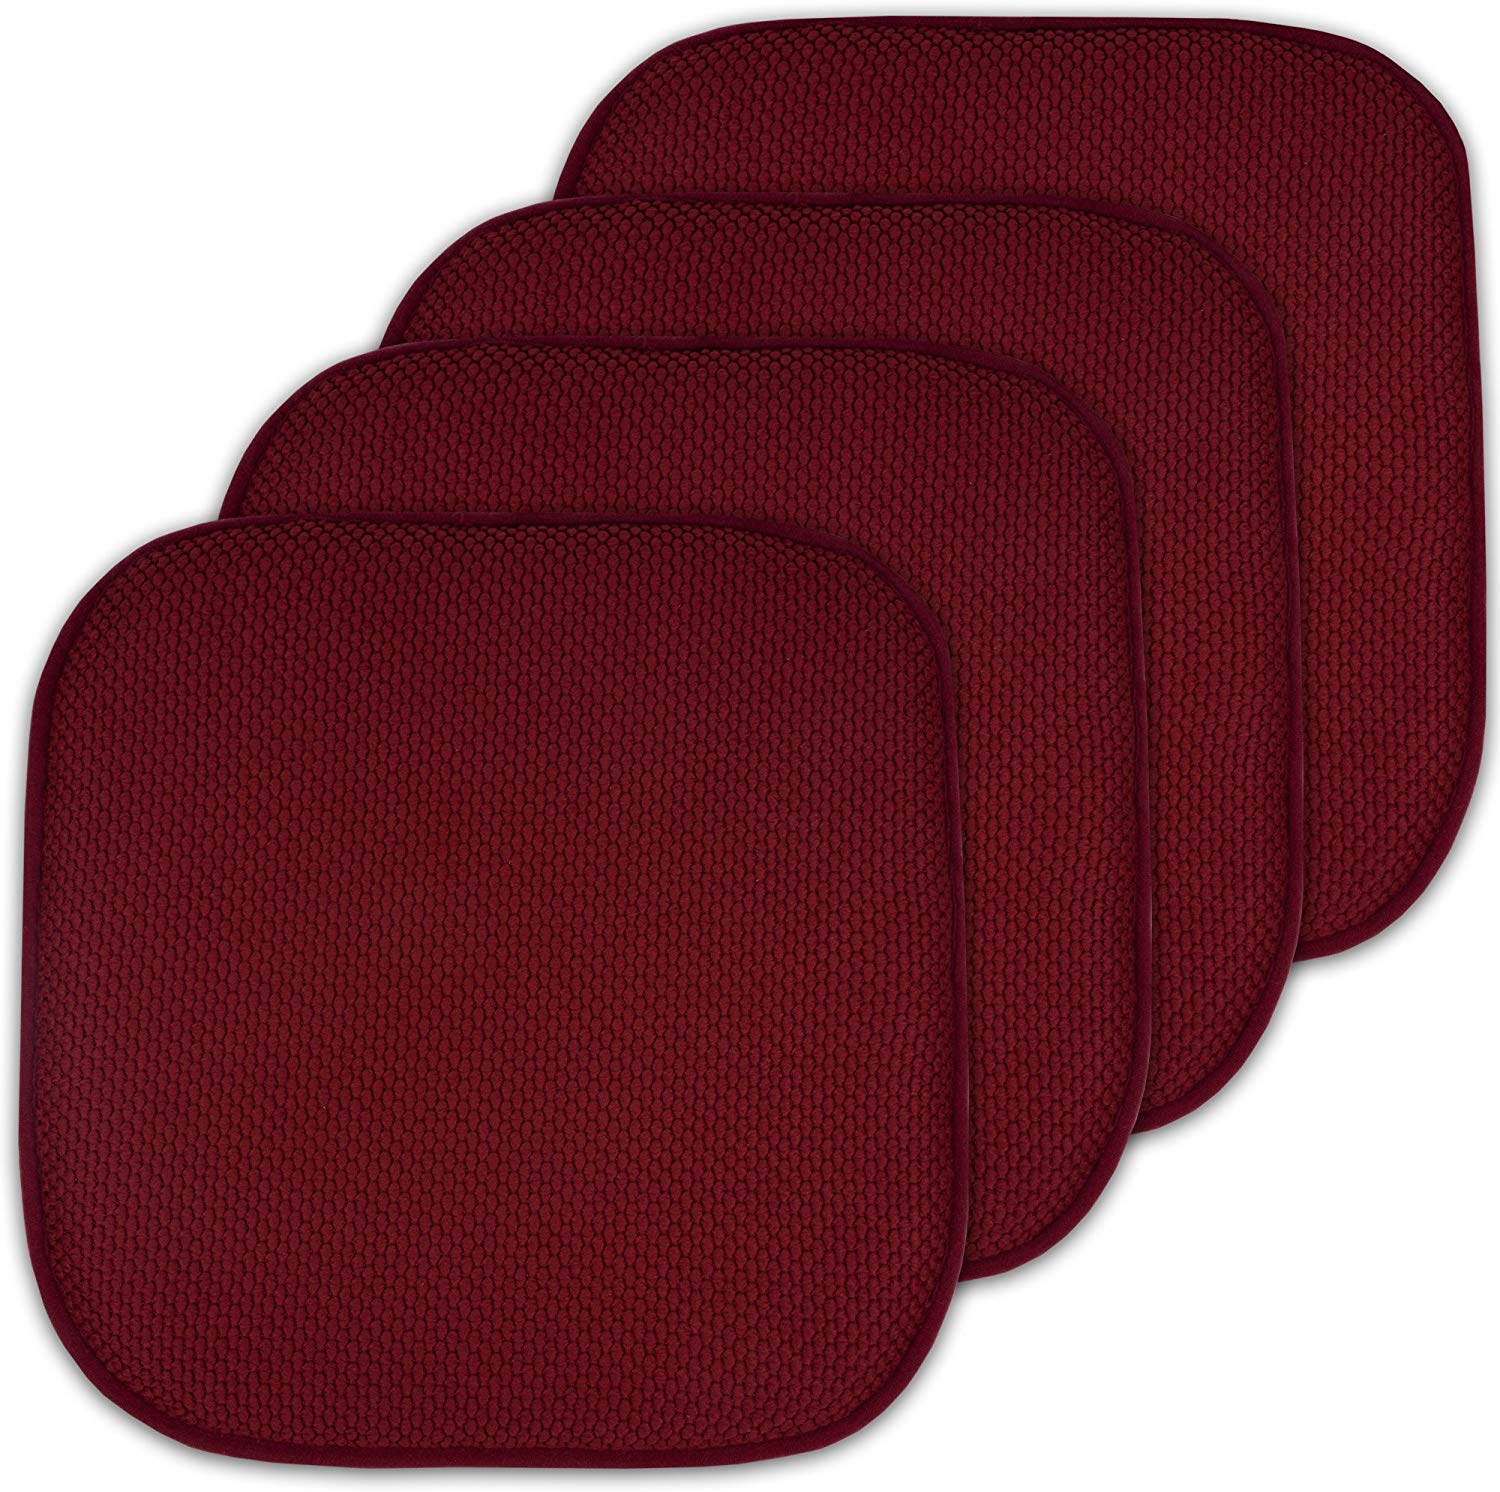 Sweet Home Collection Tie-Less Non-Slip Chair Pads, 4-Pack